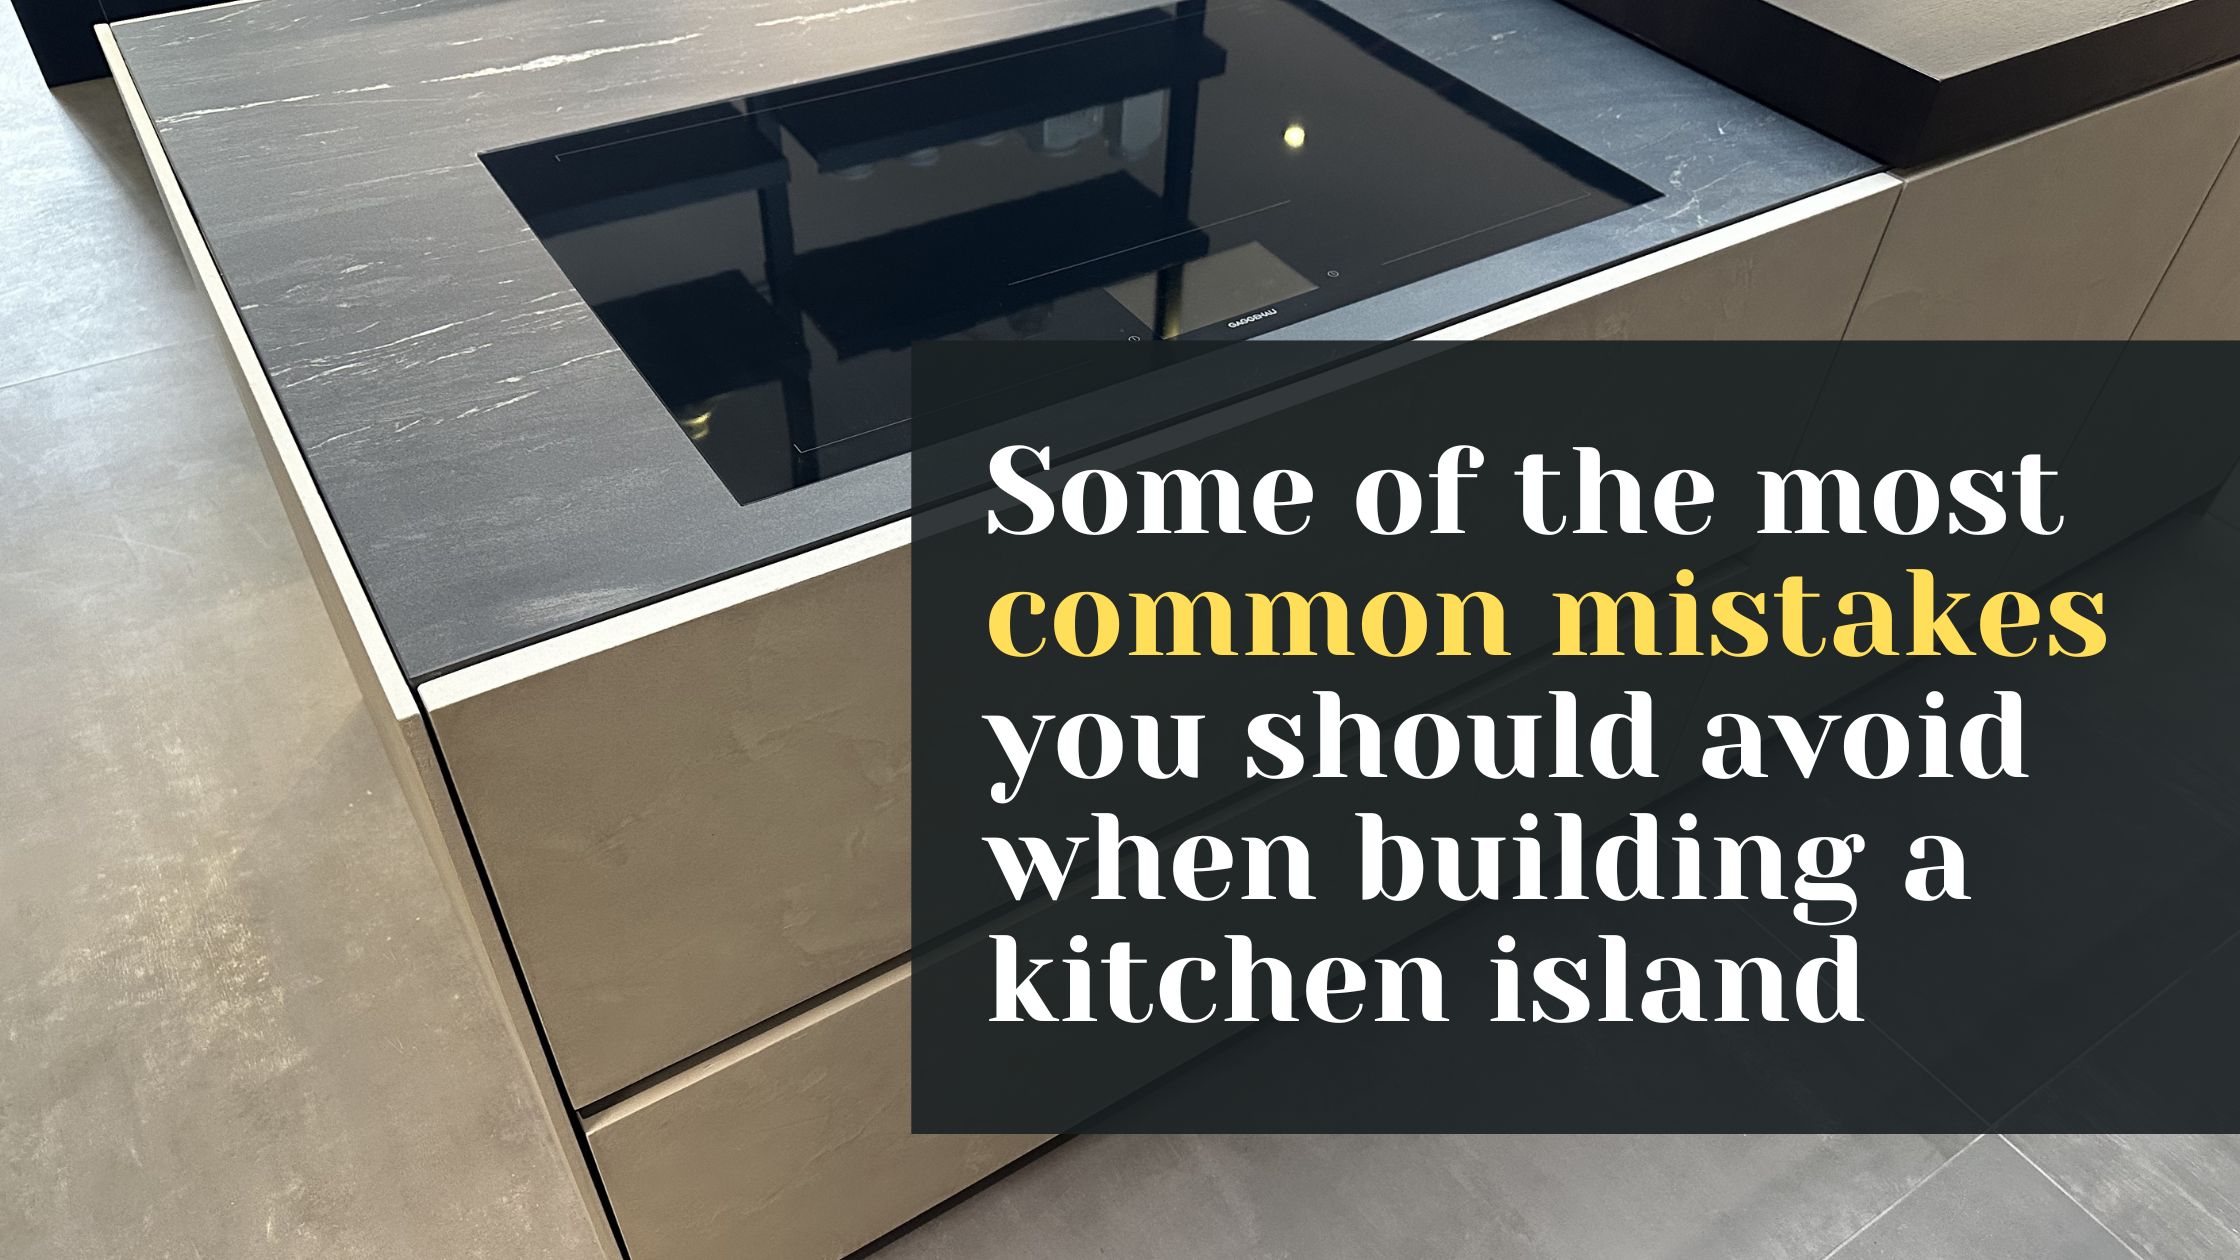 Some of the most common mistakes you should avoid when building a kitchen island